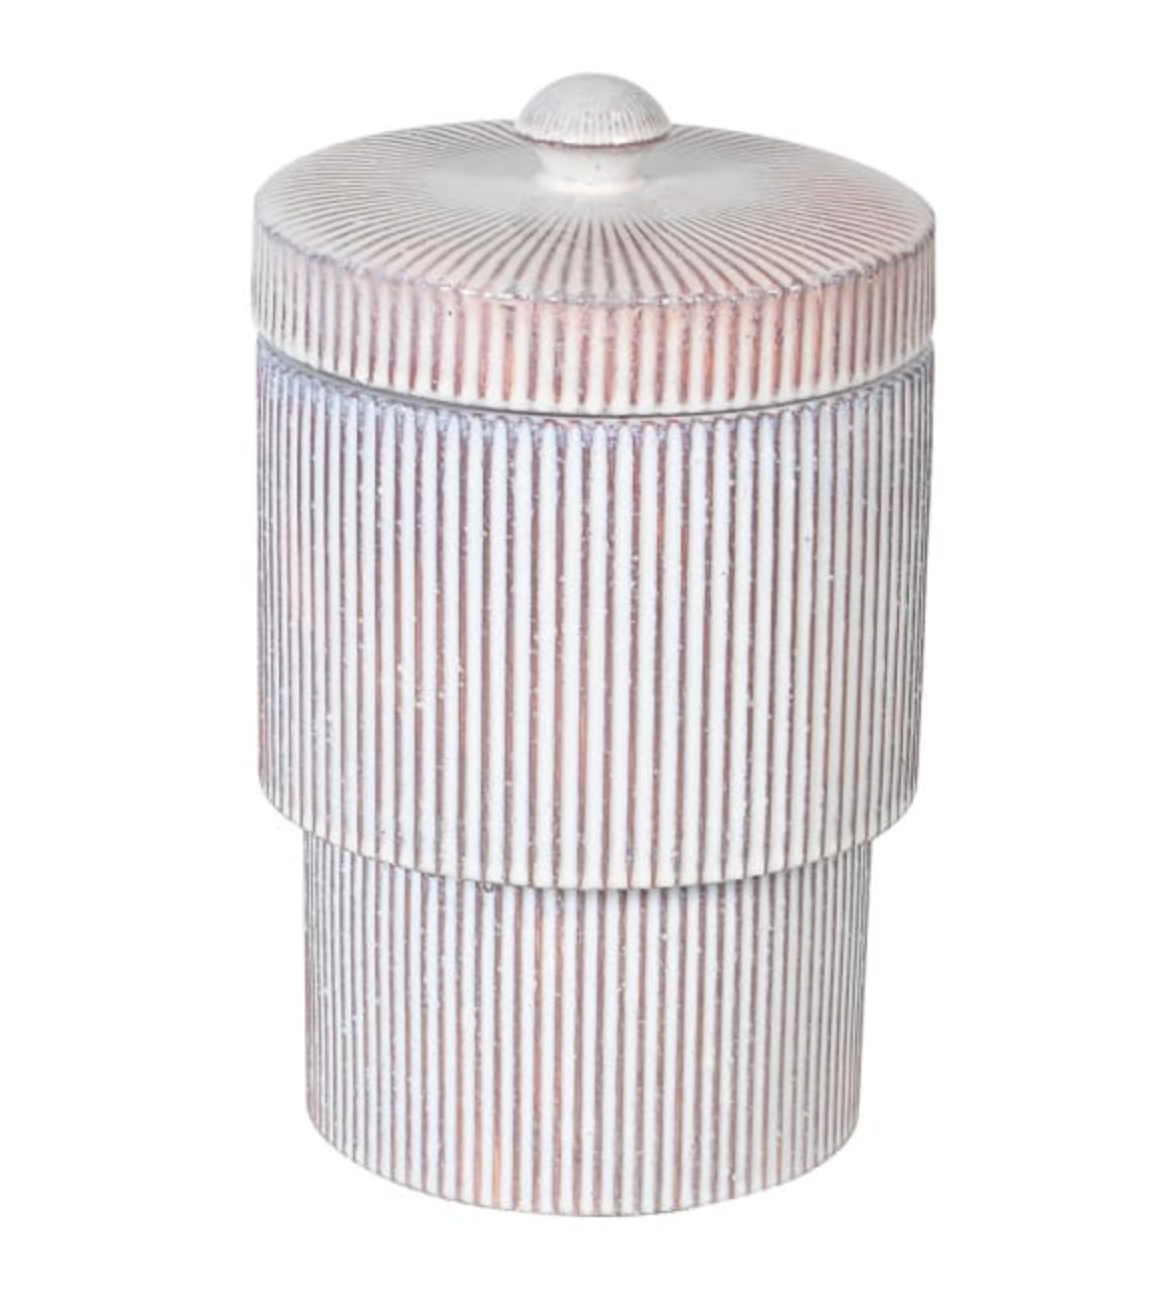 Large Red and White Striped Lidded Jar